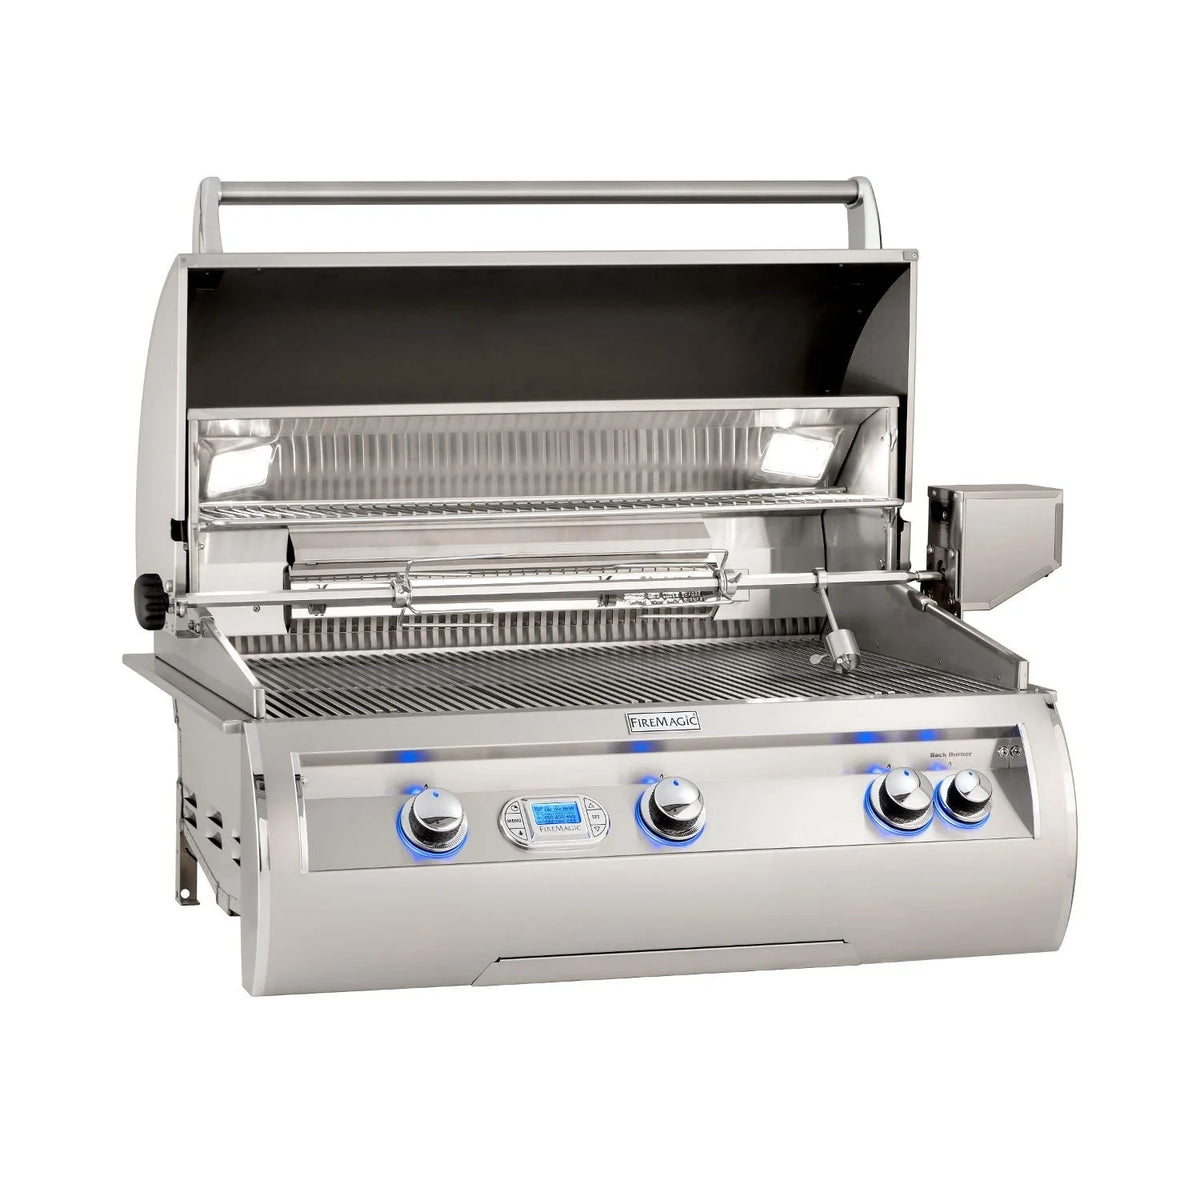 Fire Magic Echelon Diamond 36 Inch 3 Burner Built-In Gas Grill with Rotisserie and Digital Thermometer